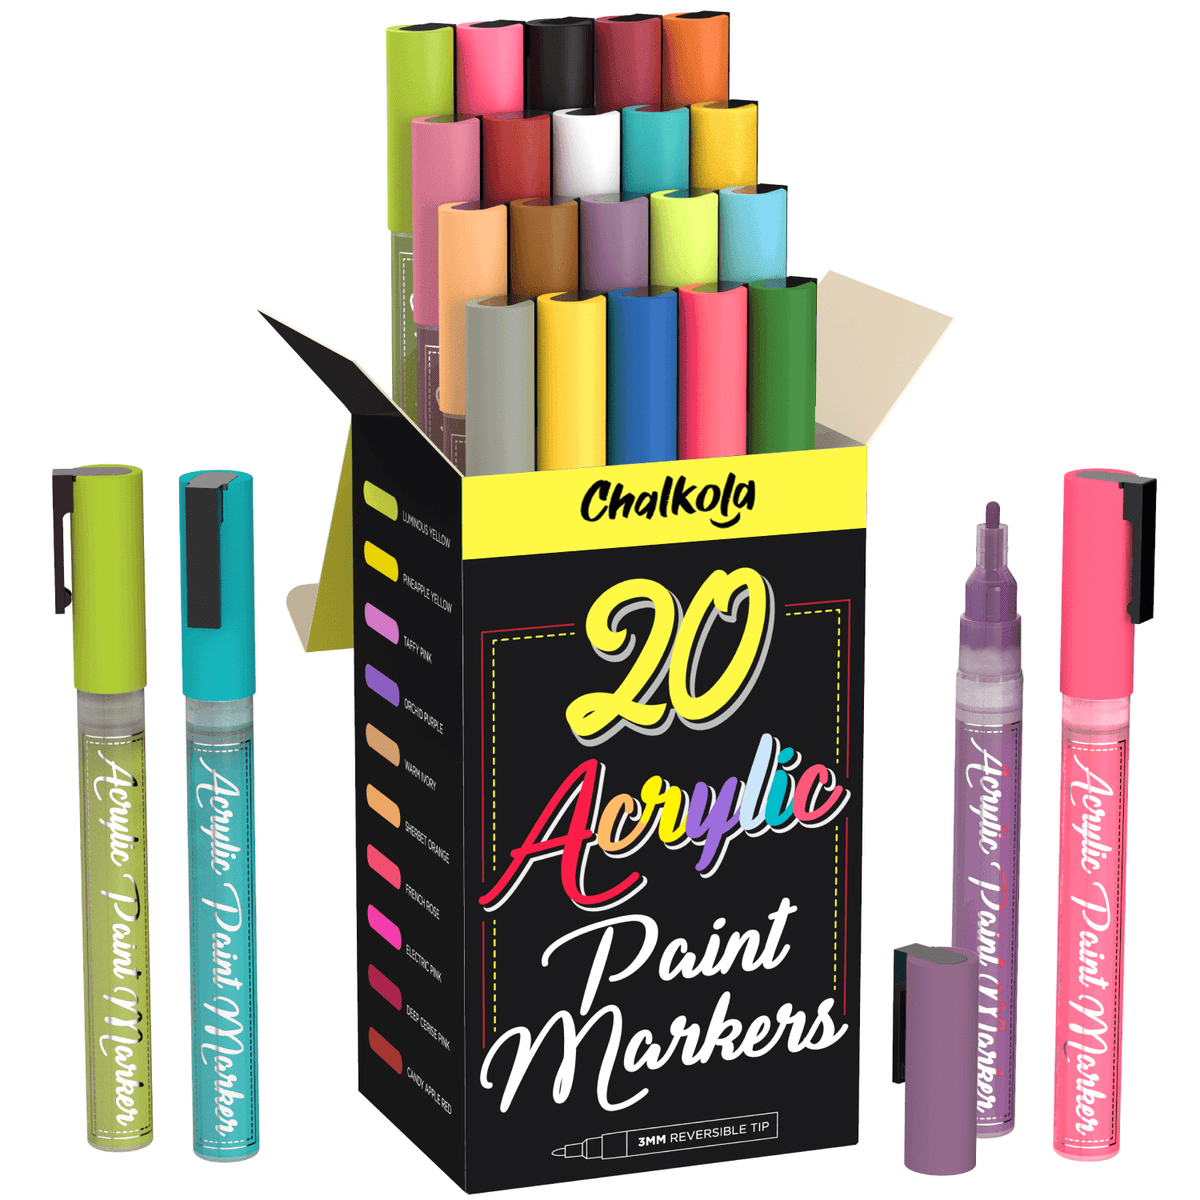 Acrylic Paint Marker Pens - Pack of 20 3mm Fine 